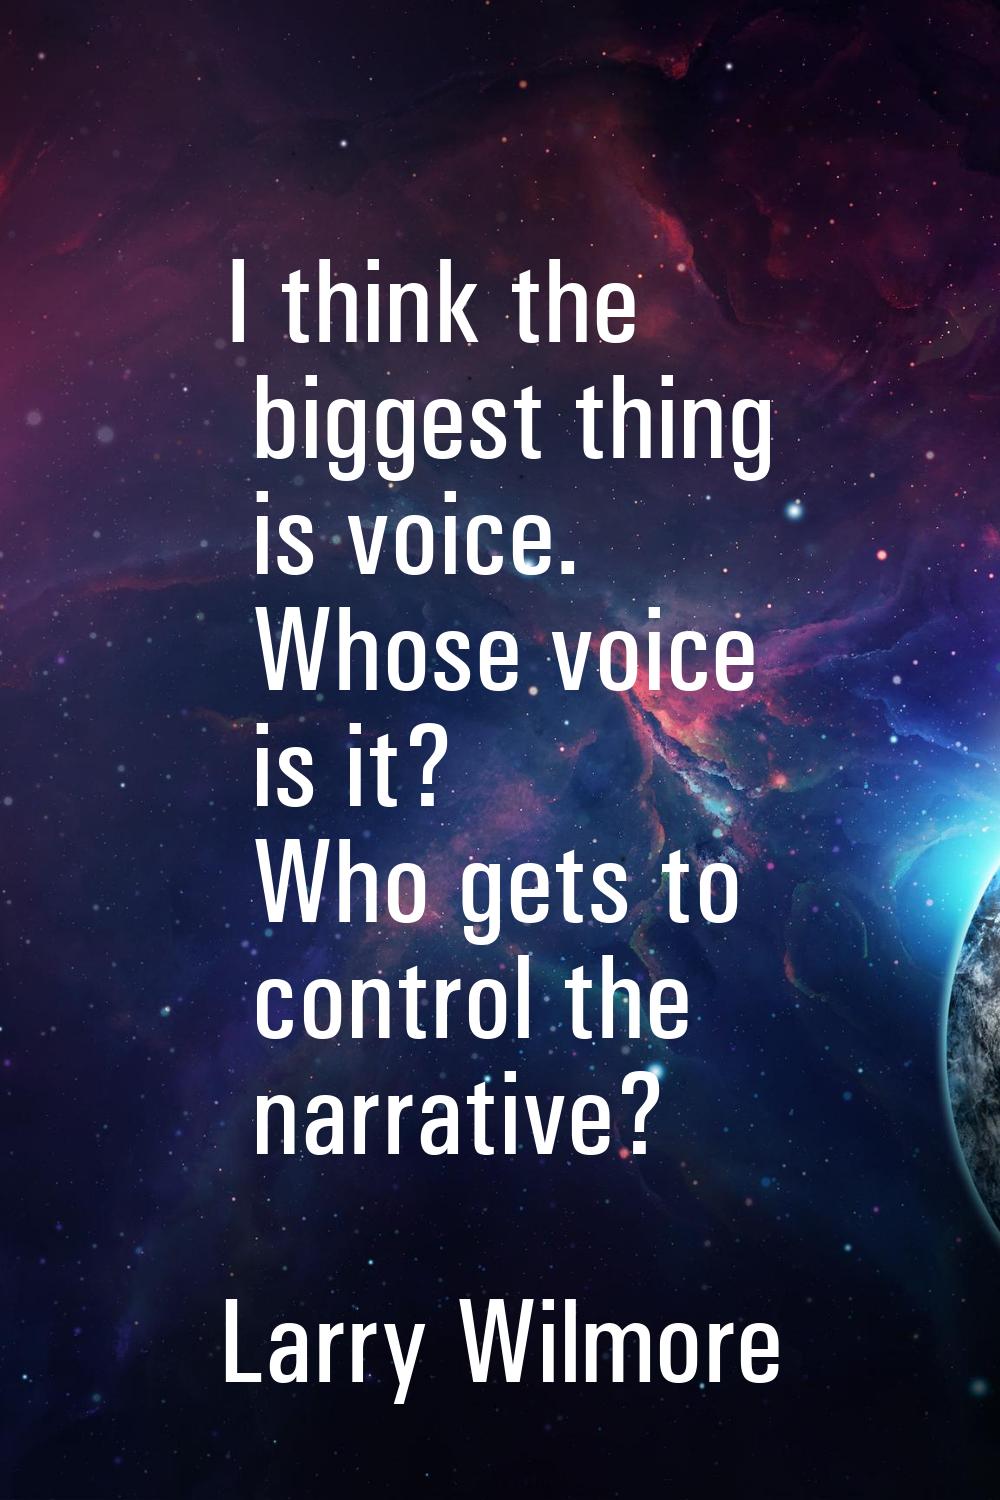 I think the biggest thing is voice. Whose voice is it? Who gets to control the narrative?